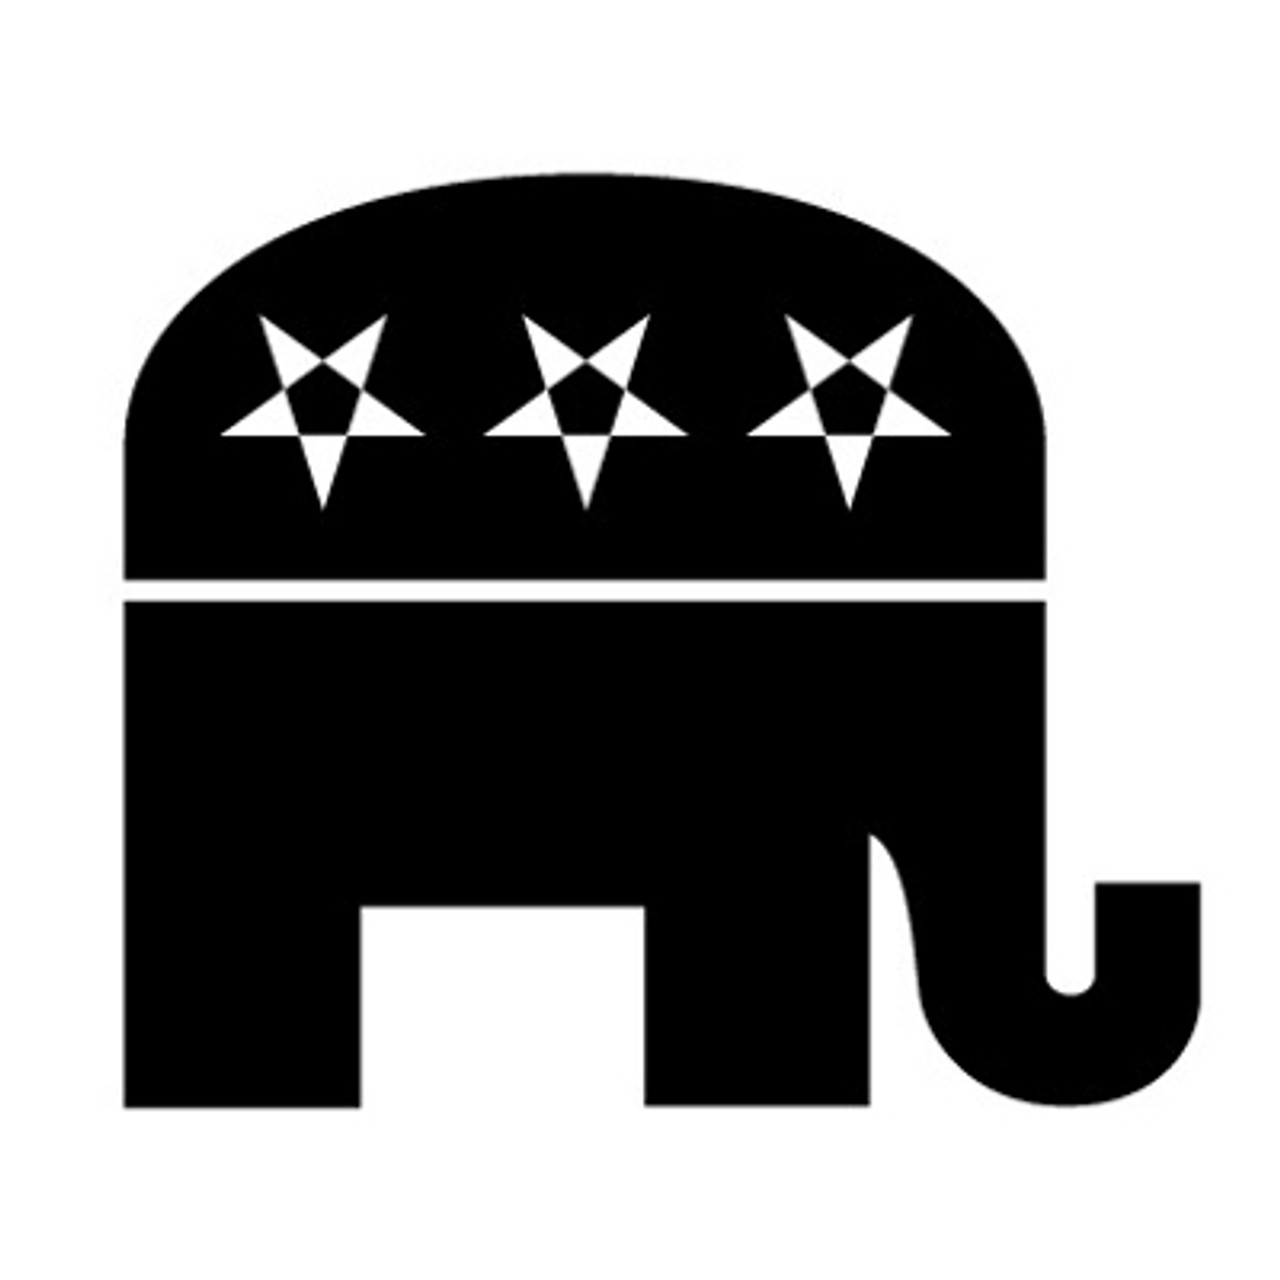 black and white republican elephant